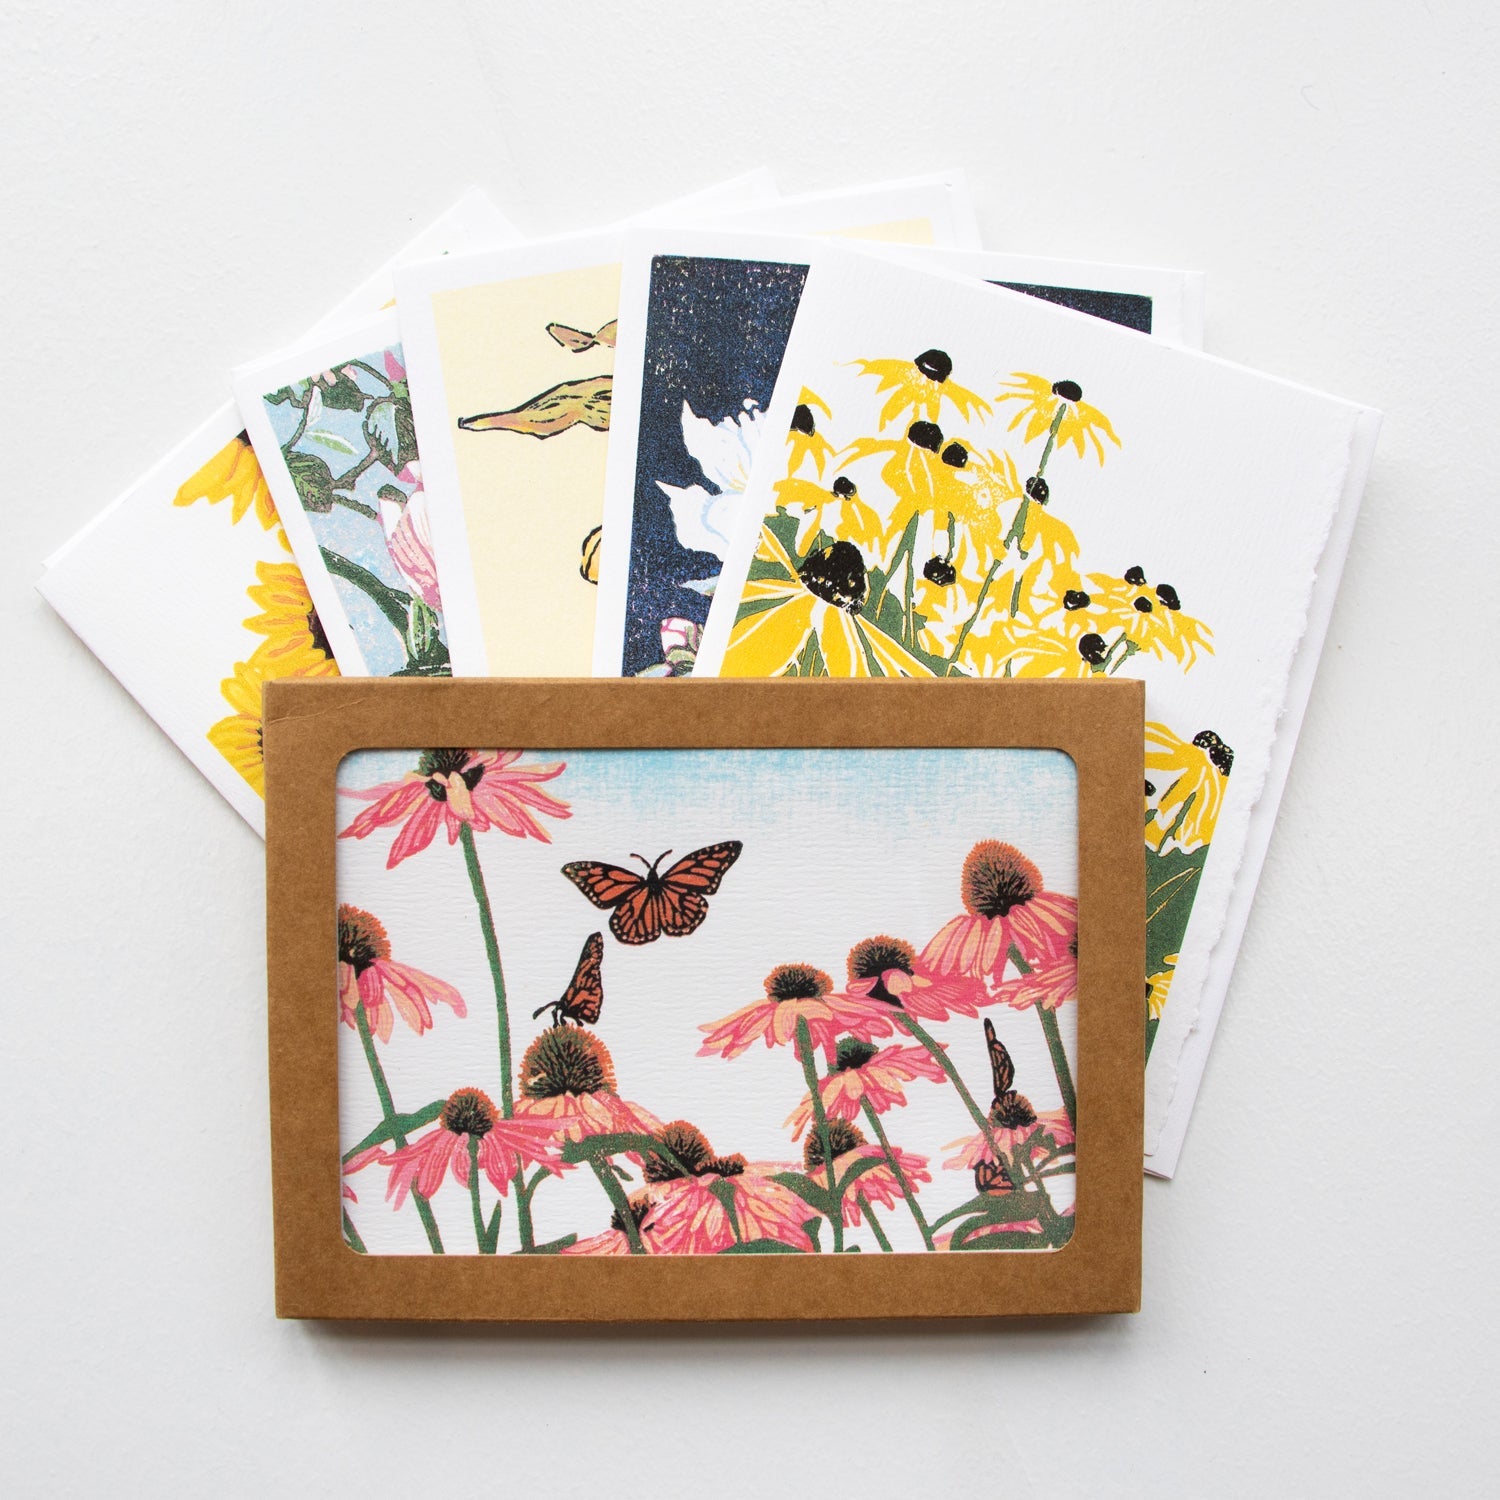 A casually elegant card set featuring floral art by Natalia Wohletz.